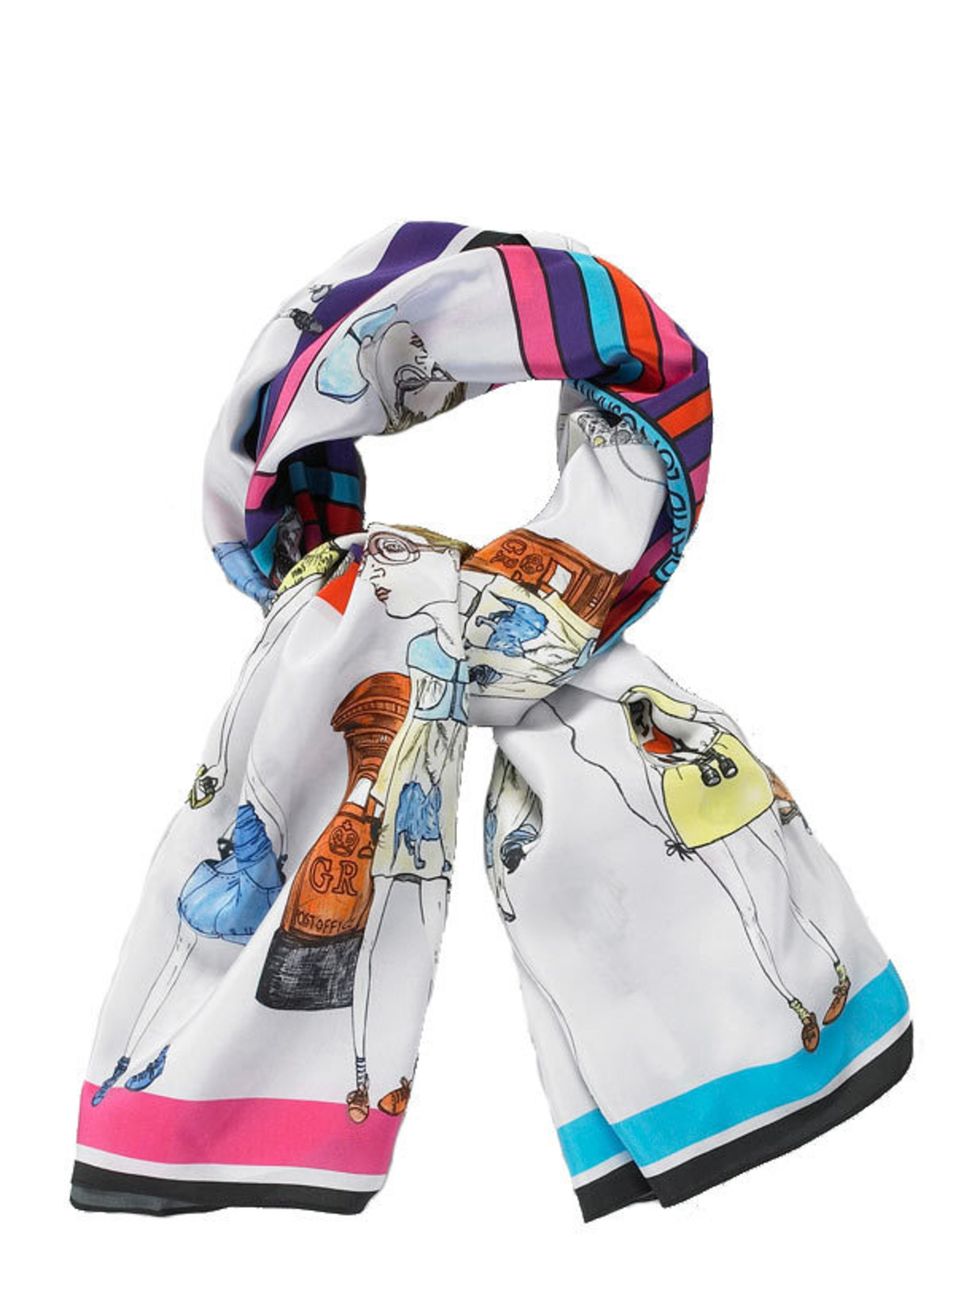 <p>Dominique Mosley &amp; David Longshaw 'Globetrotter' scarf, £249, at <a href="http://www.harrods.com/product/david-longshaw-and-dominique-mosley/globetrotter-illustrated-scarf/000000000002508939?cat1=accessories&amp;cat2=for-her-scarves">Harrods</a></p